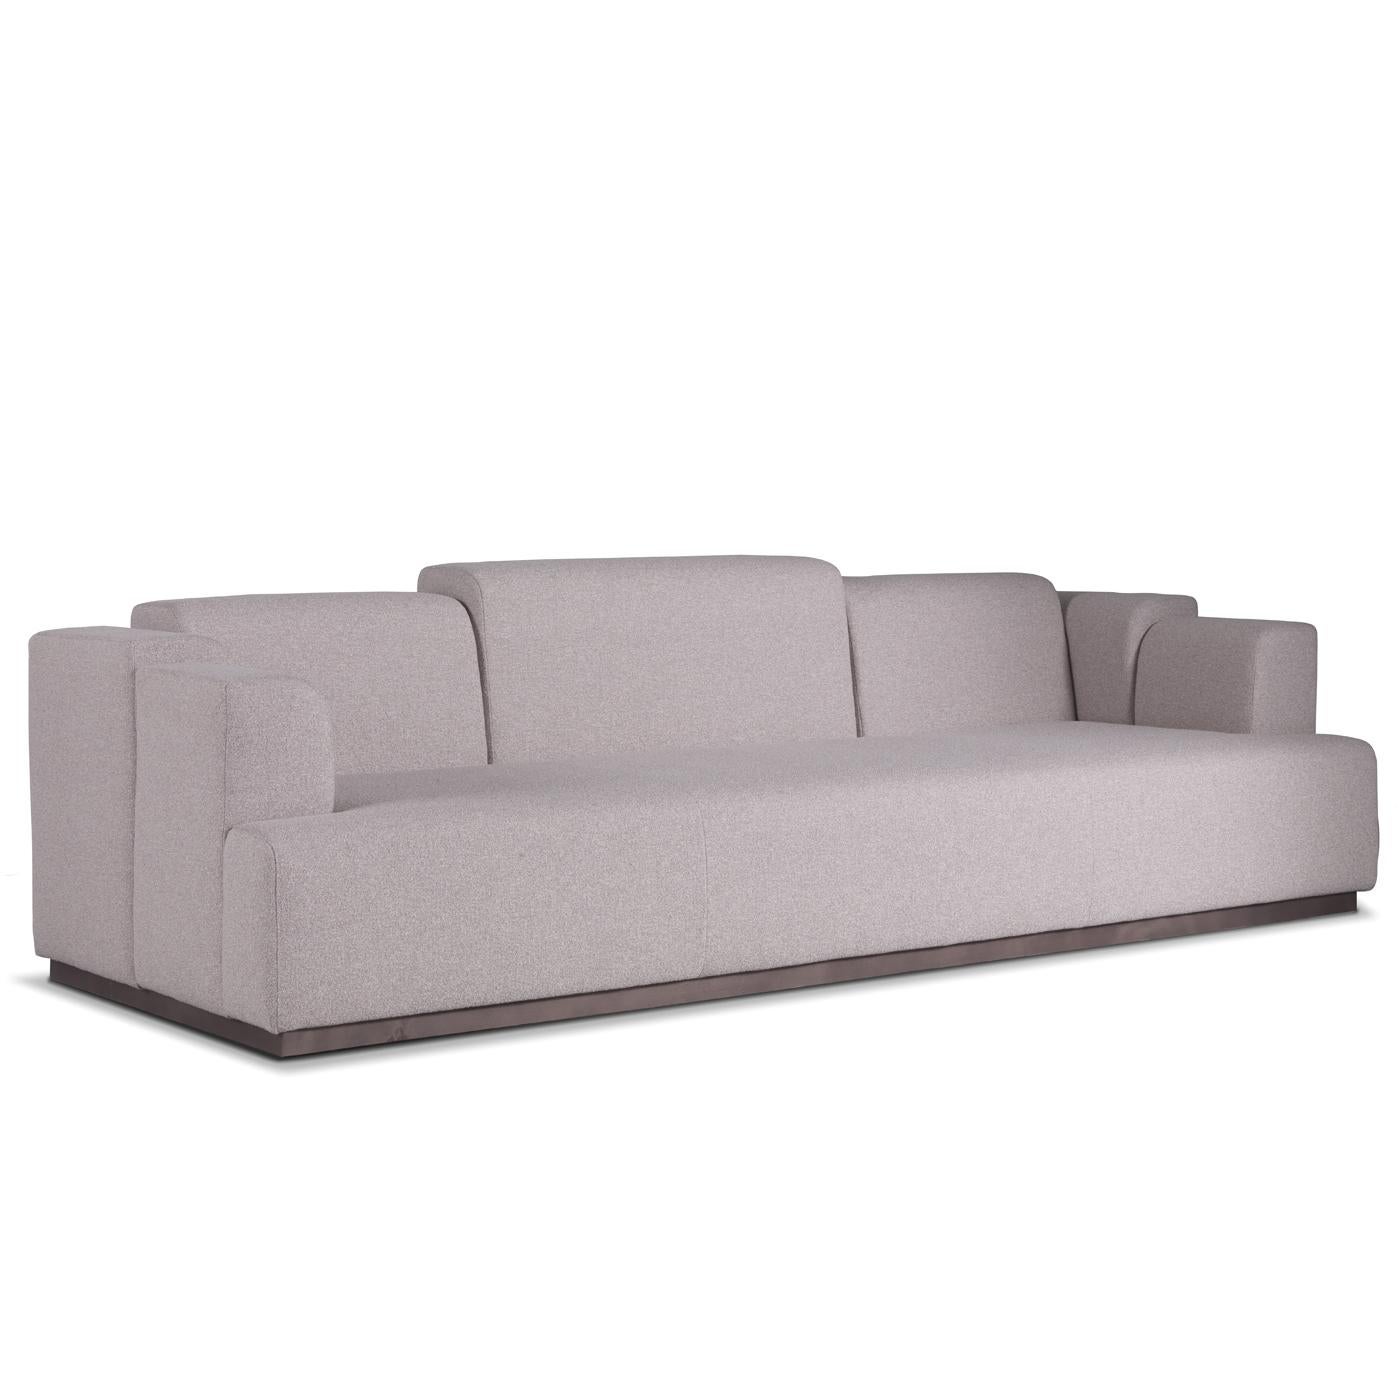 Inspired by the 1980s style, this striking sofa is a one-of-a-kind piece that will make a statement in any living room. Boasting an elegant grey color, it is marked by a unique back with sections of different measures that create a captivating and